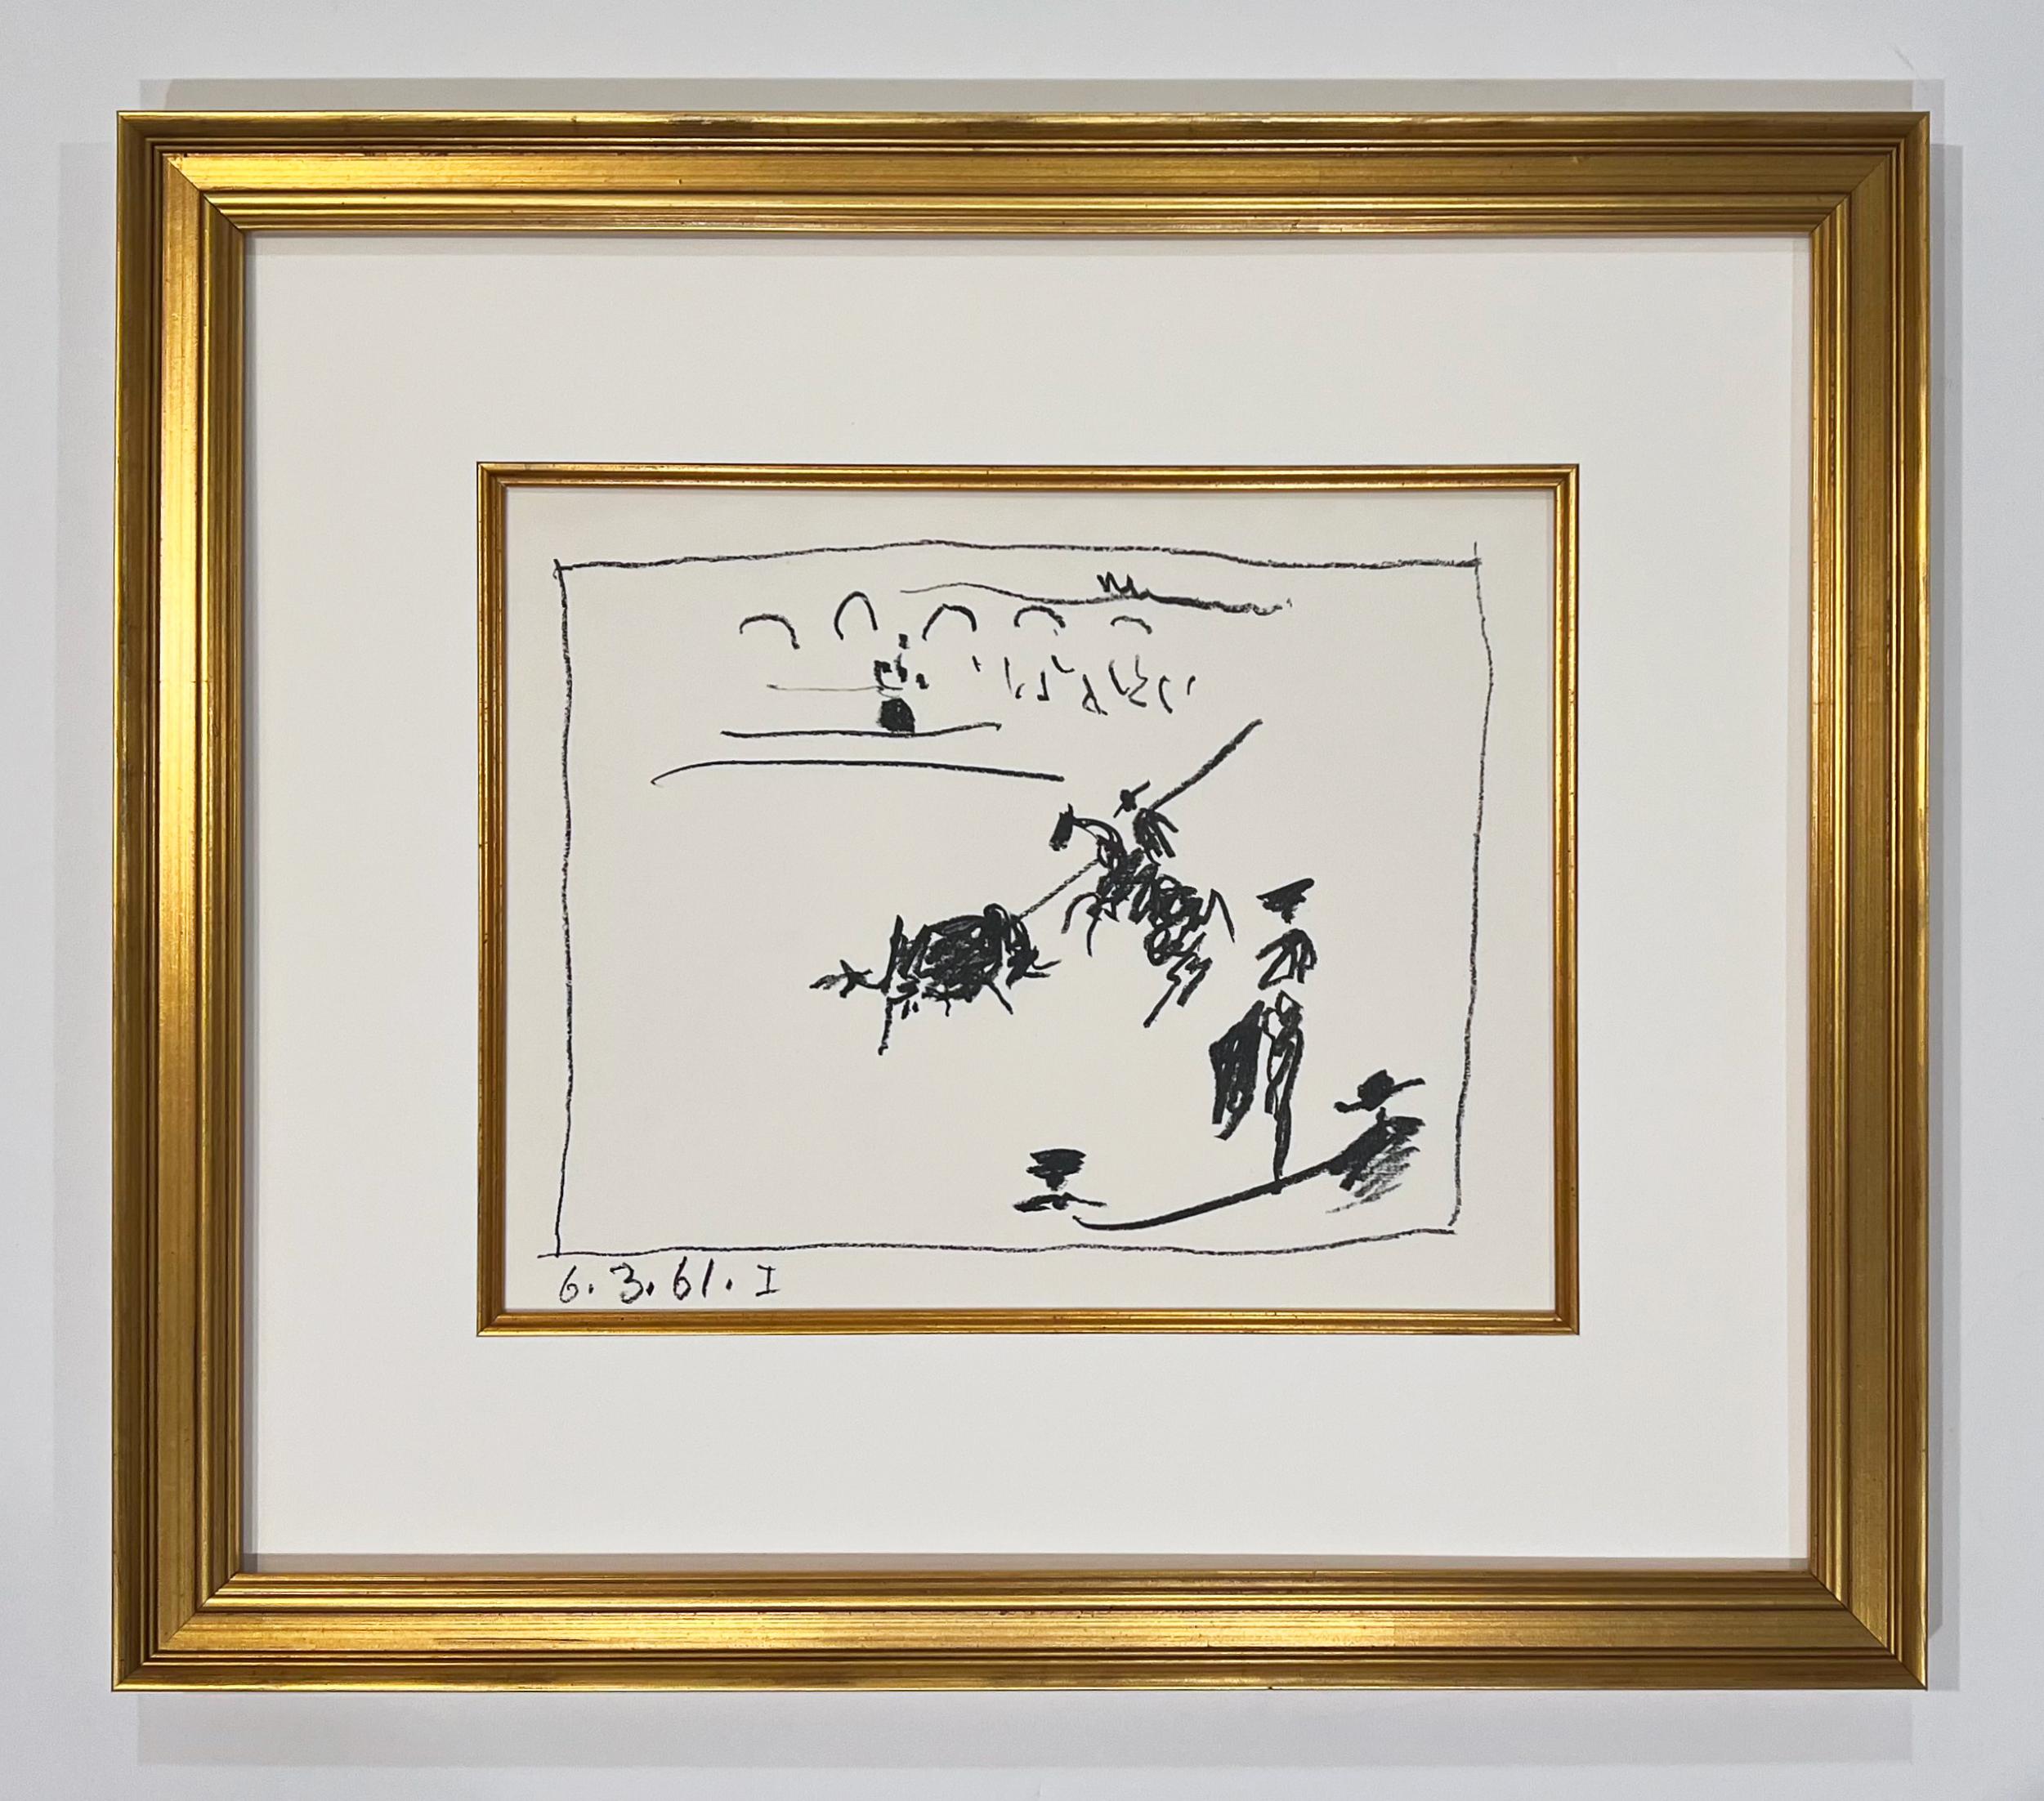 A Los Toros Avec Picasso (Set of Four) - Abstract Print by Pablo Picasso